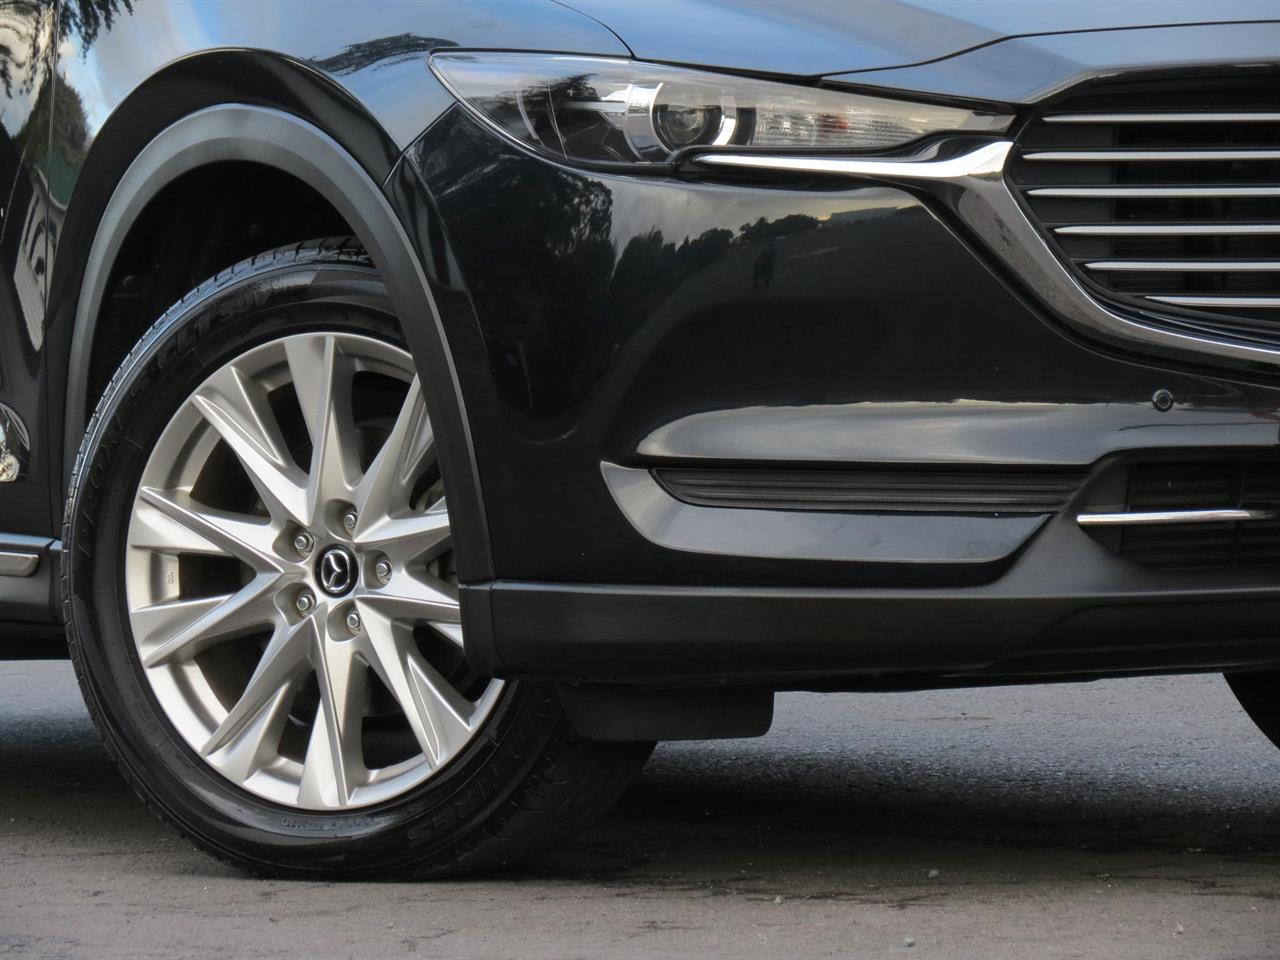 2018 Mazda CX-8 only $89 weekly